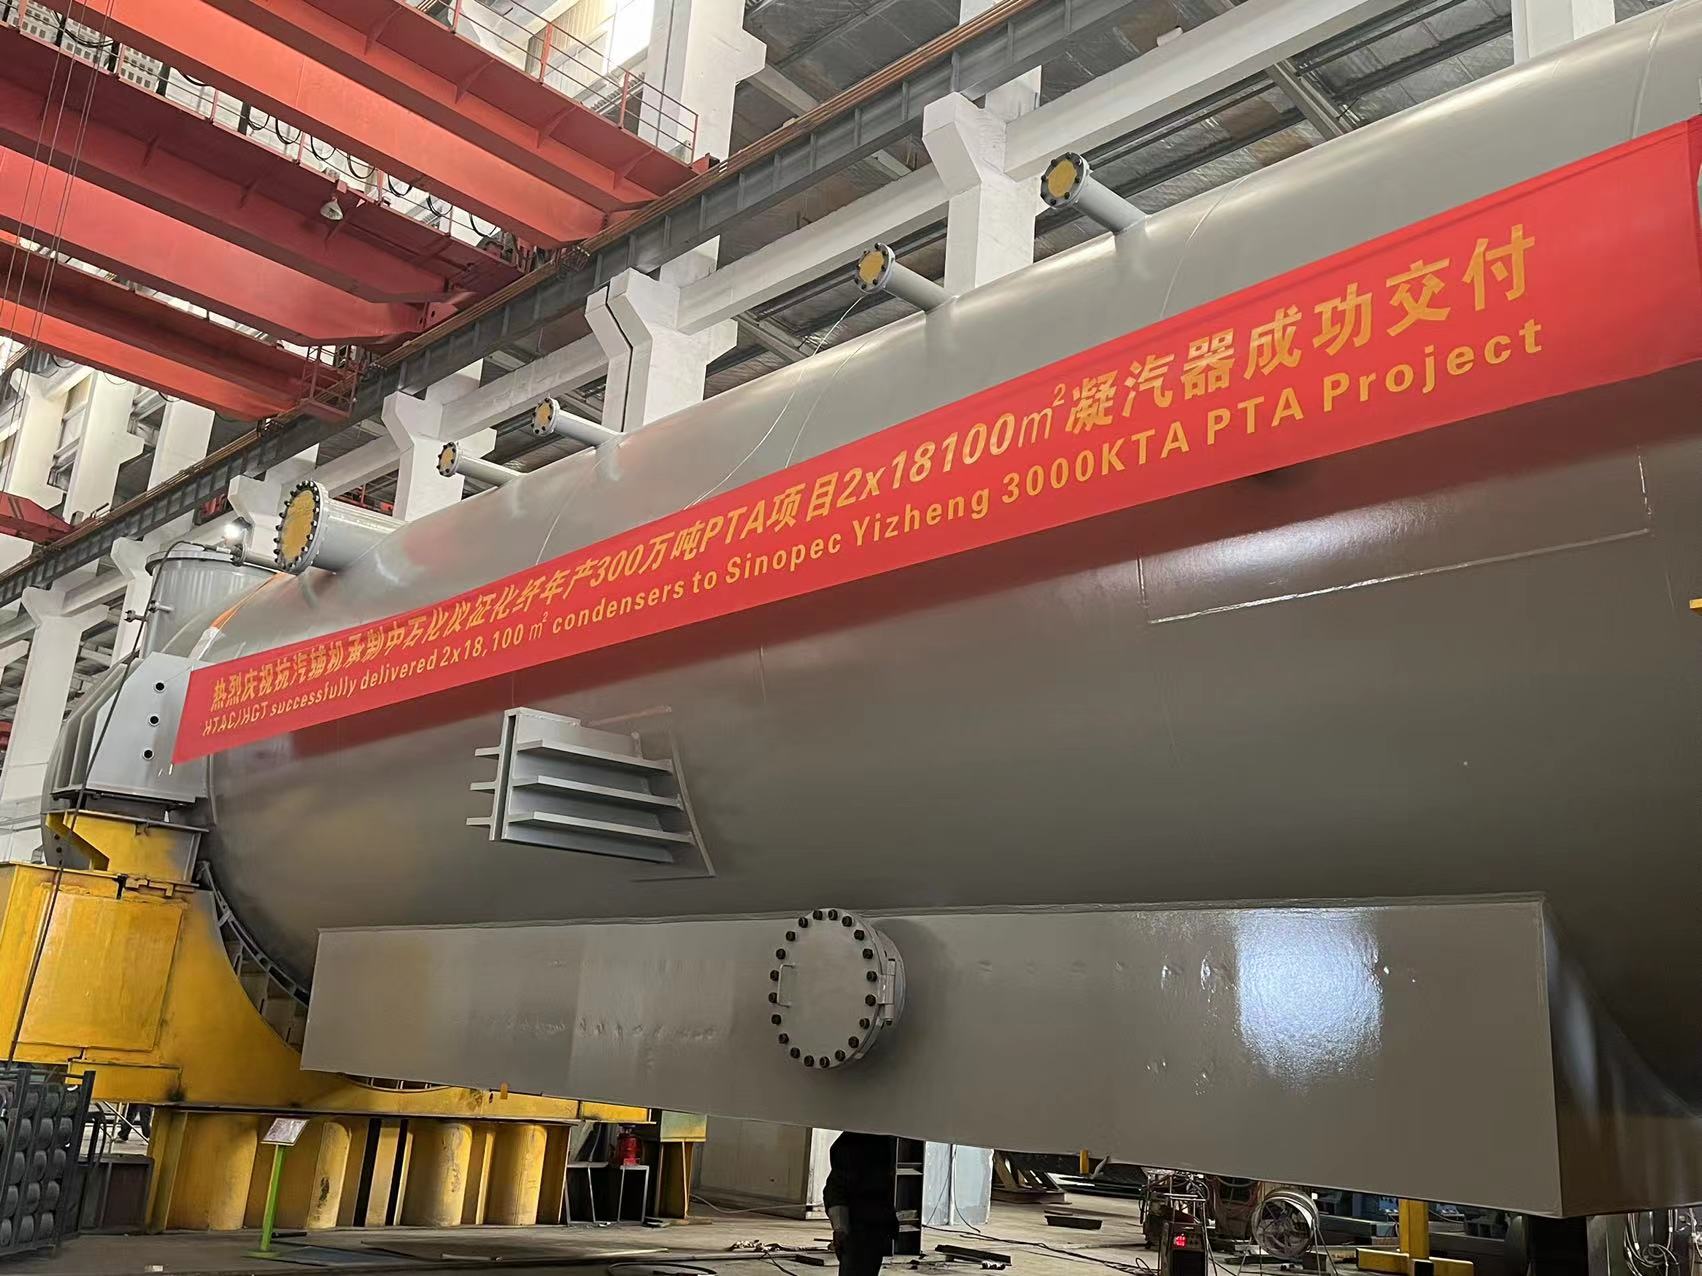 Yizheng，China丨HGT successfully delivered 2x18,100㎡ condensers to Sinopec Yizheng 3000KTA PTA Project